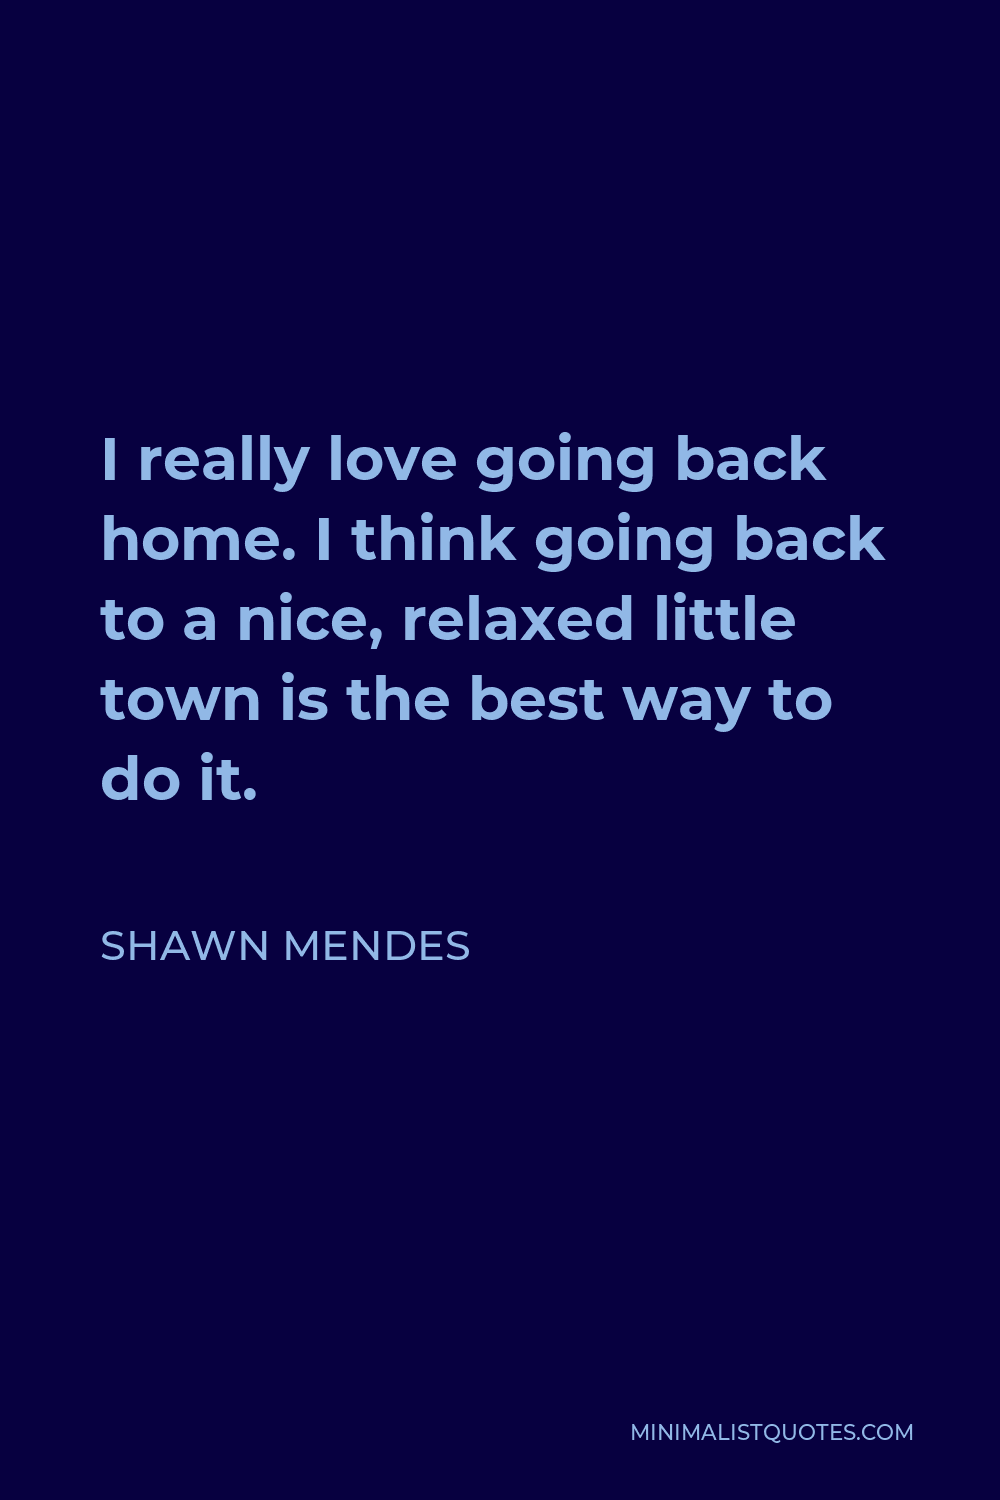 Shawn Mendes Quote - I really love going back home. I think going back to a nice, relaxed little town is the best way to do it.